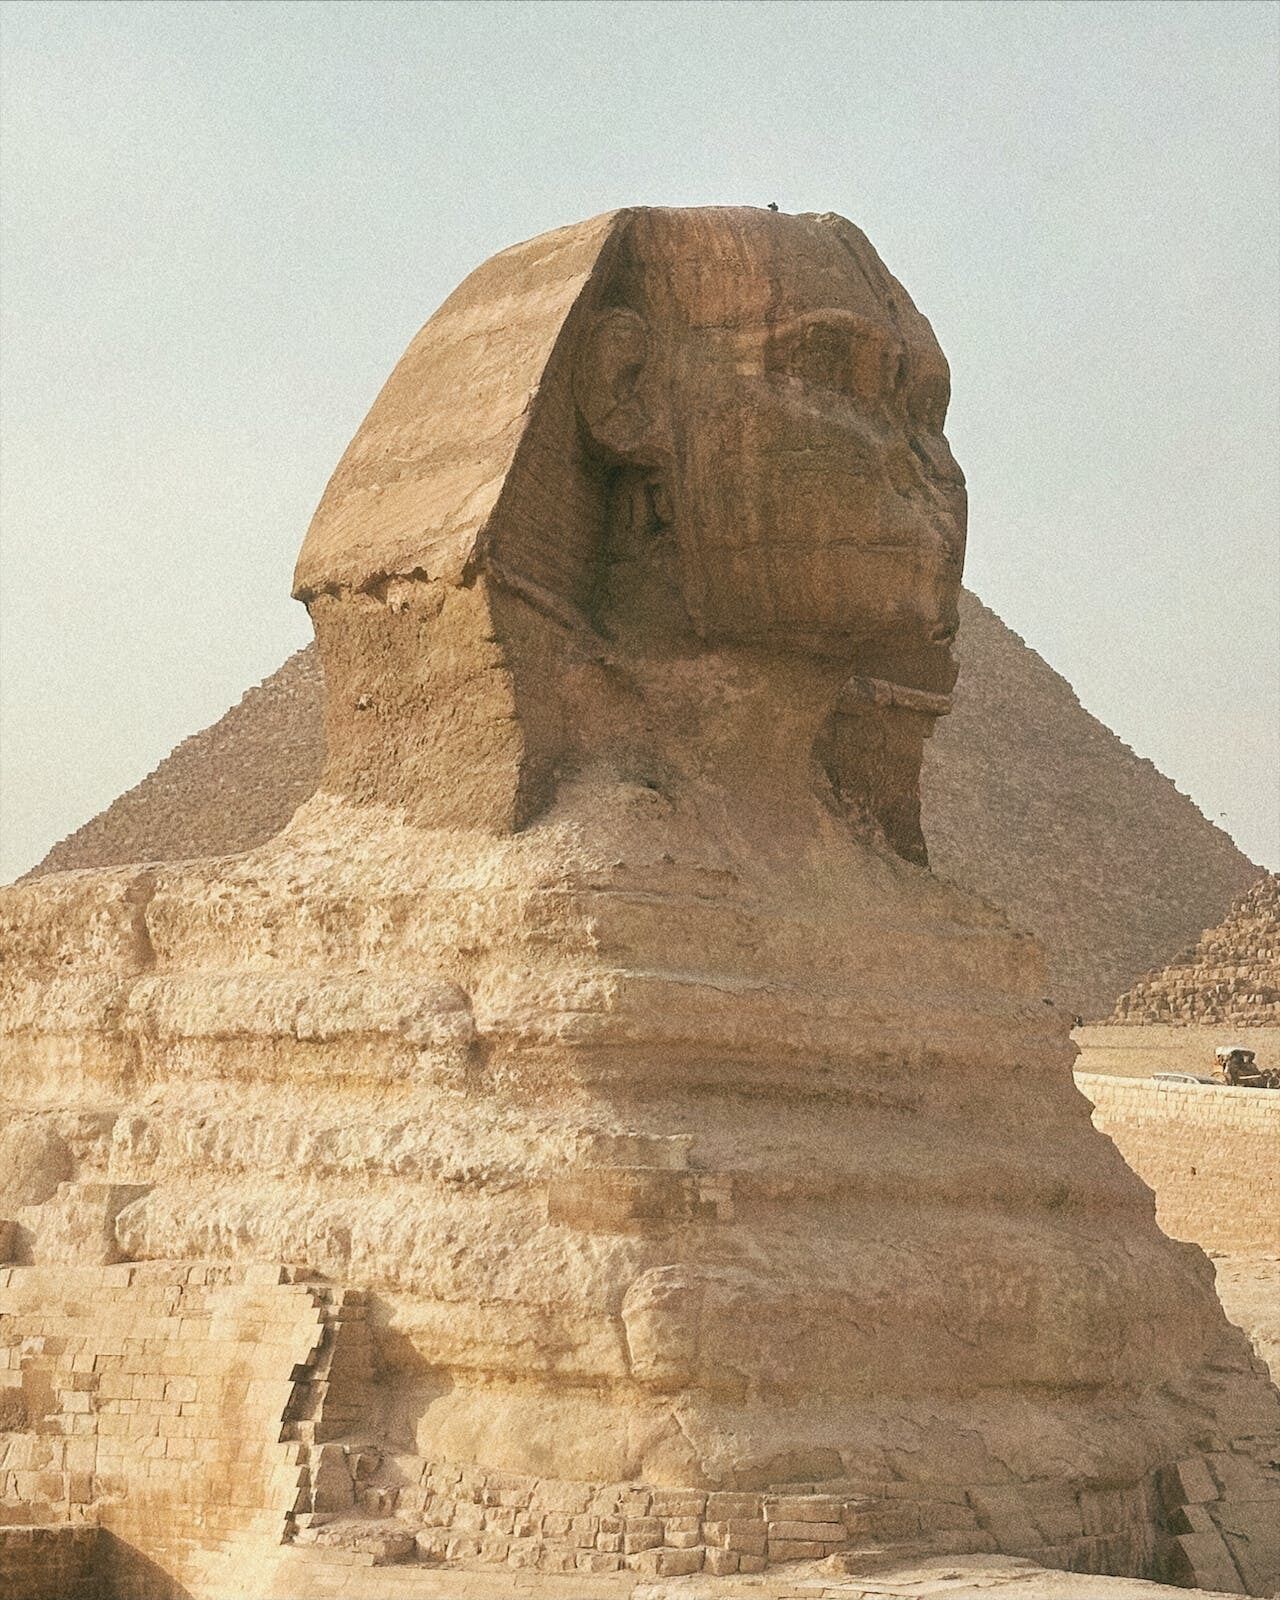 Scientists discover that the huge Sphinx in Giza may not have been created by humans